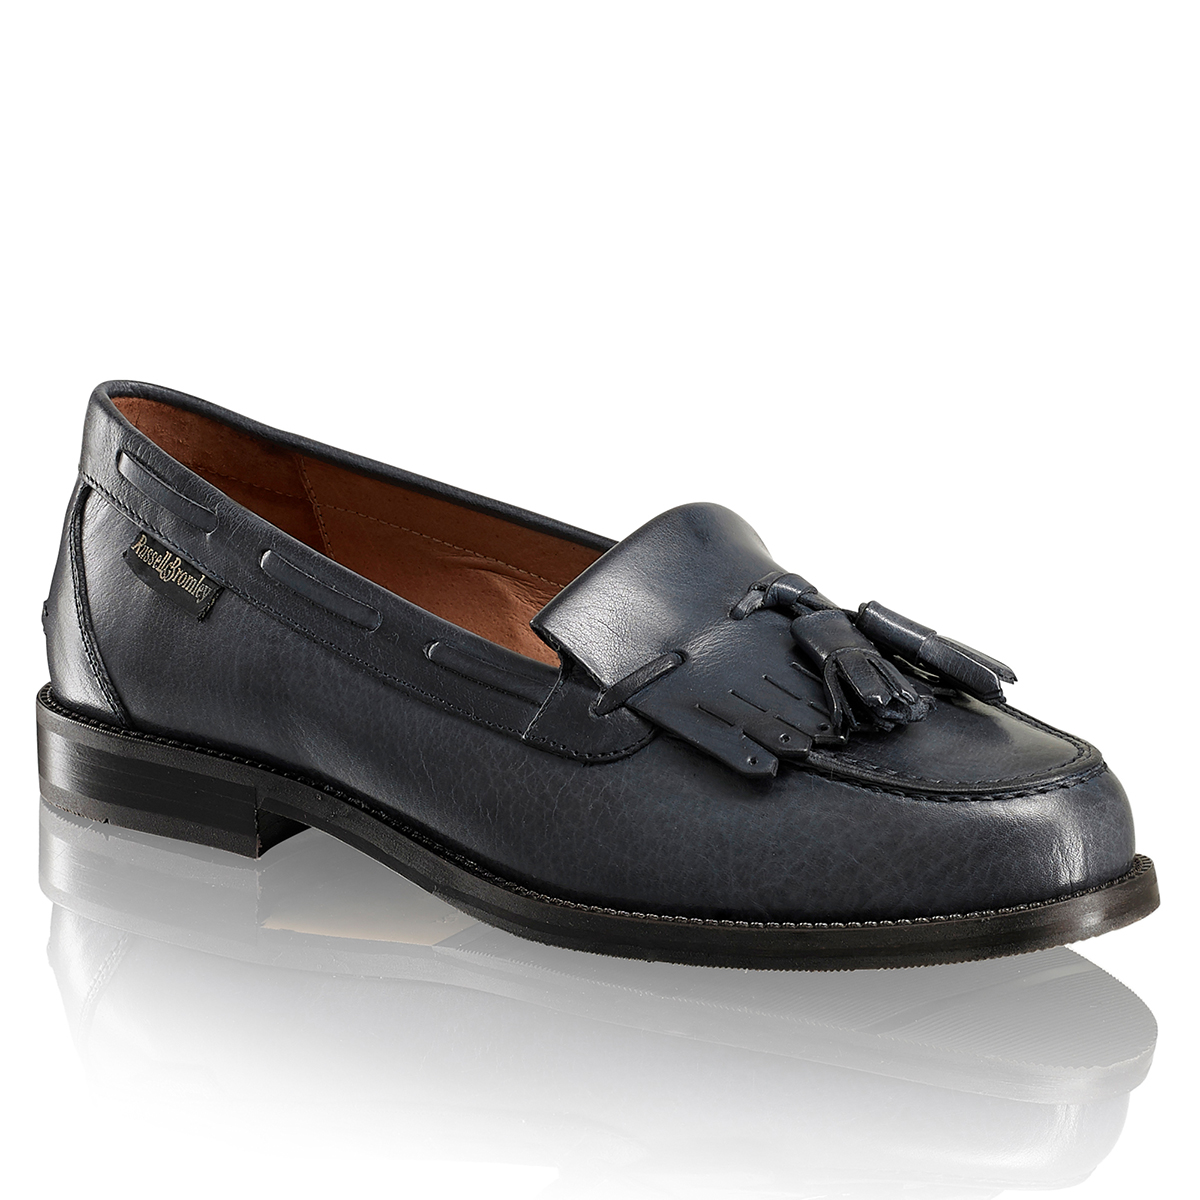 Russell & Bromley CHESTER Tassel Loafer - Russell & Bromley